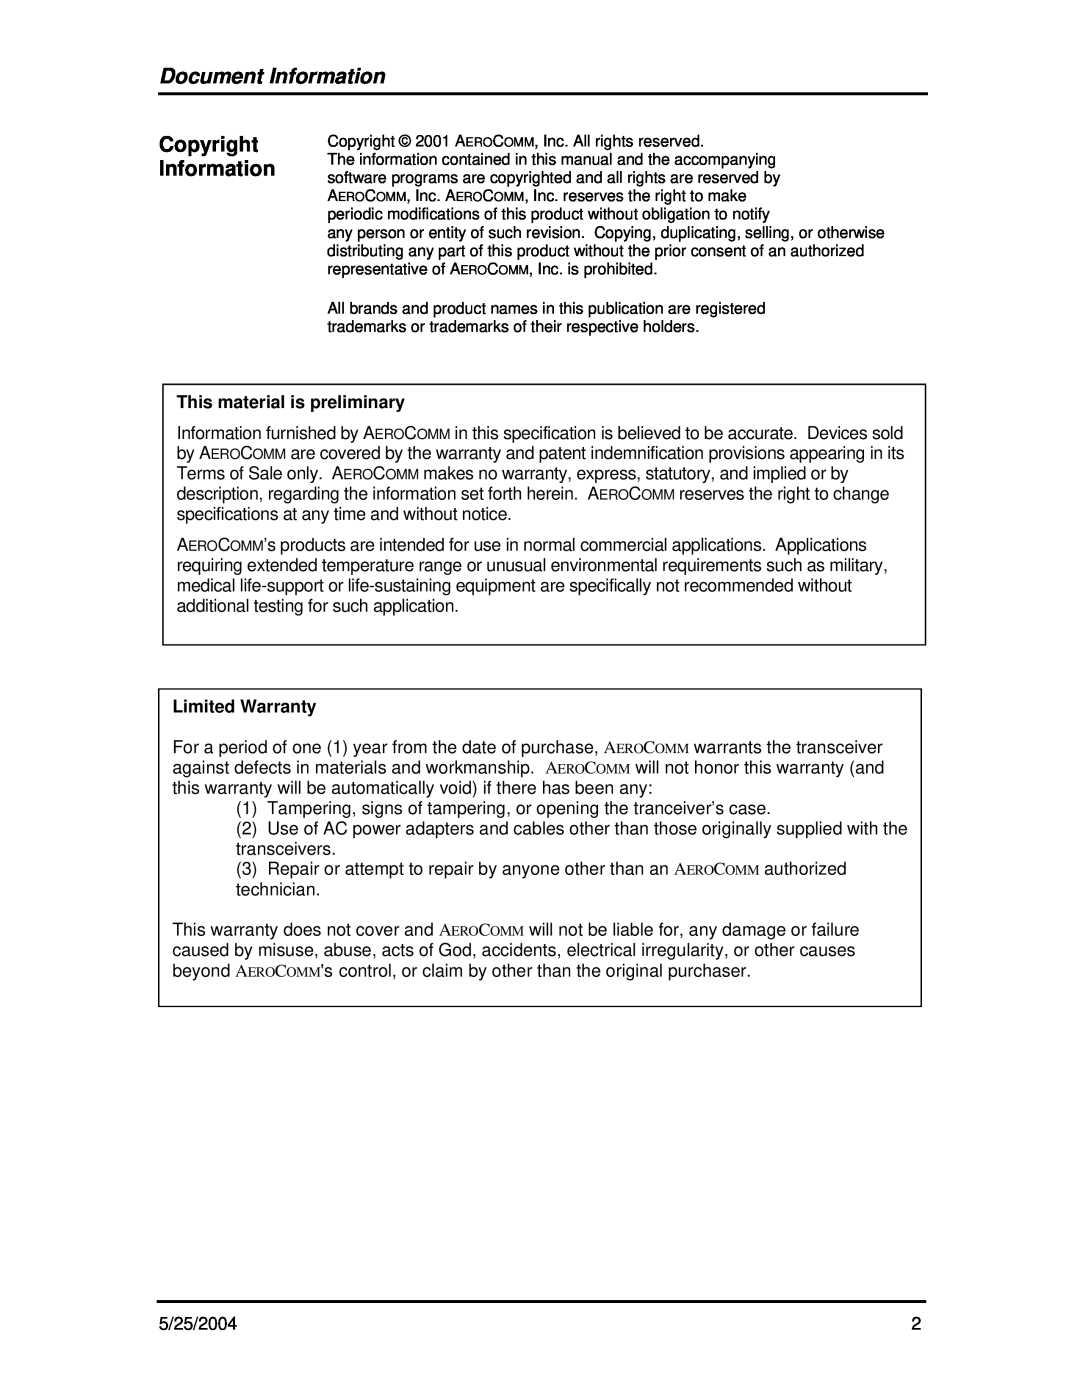 AeroComm ConnexModem Version 2.0 user manual Document Information, Copyright Information, This material is preliminary 